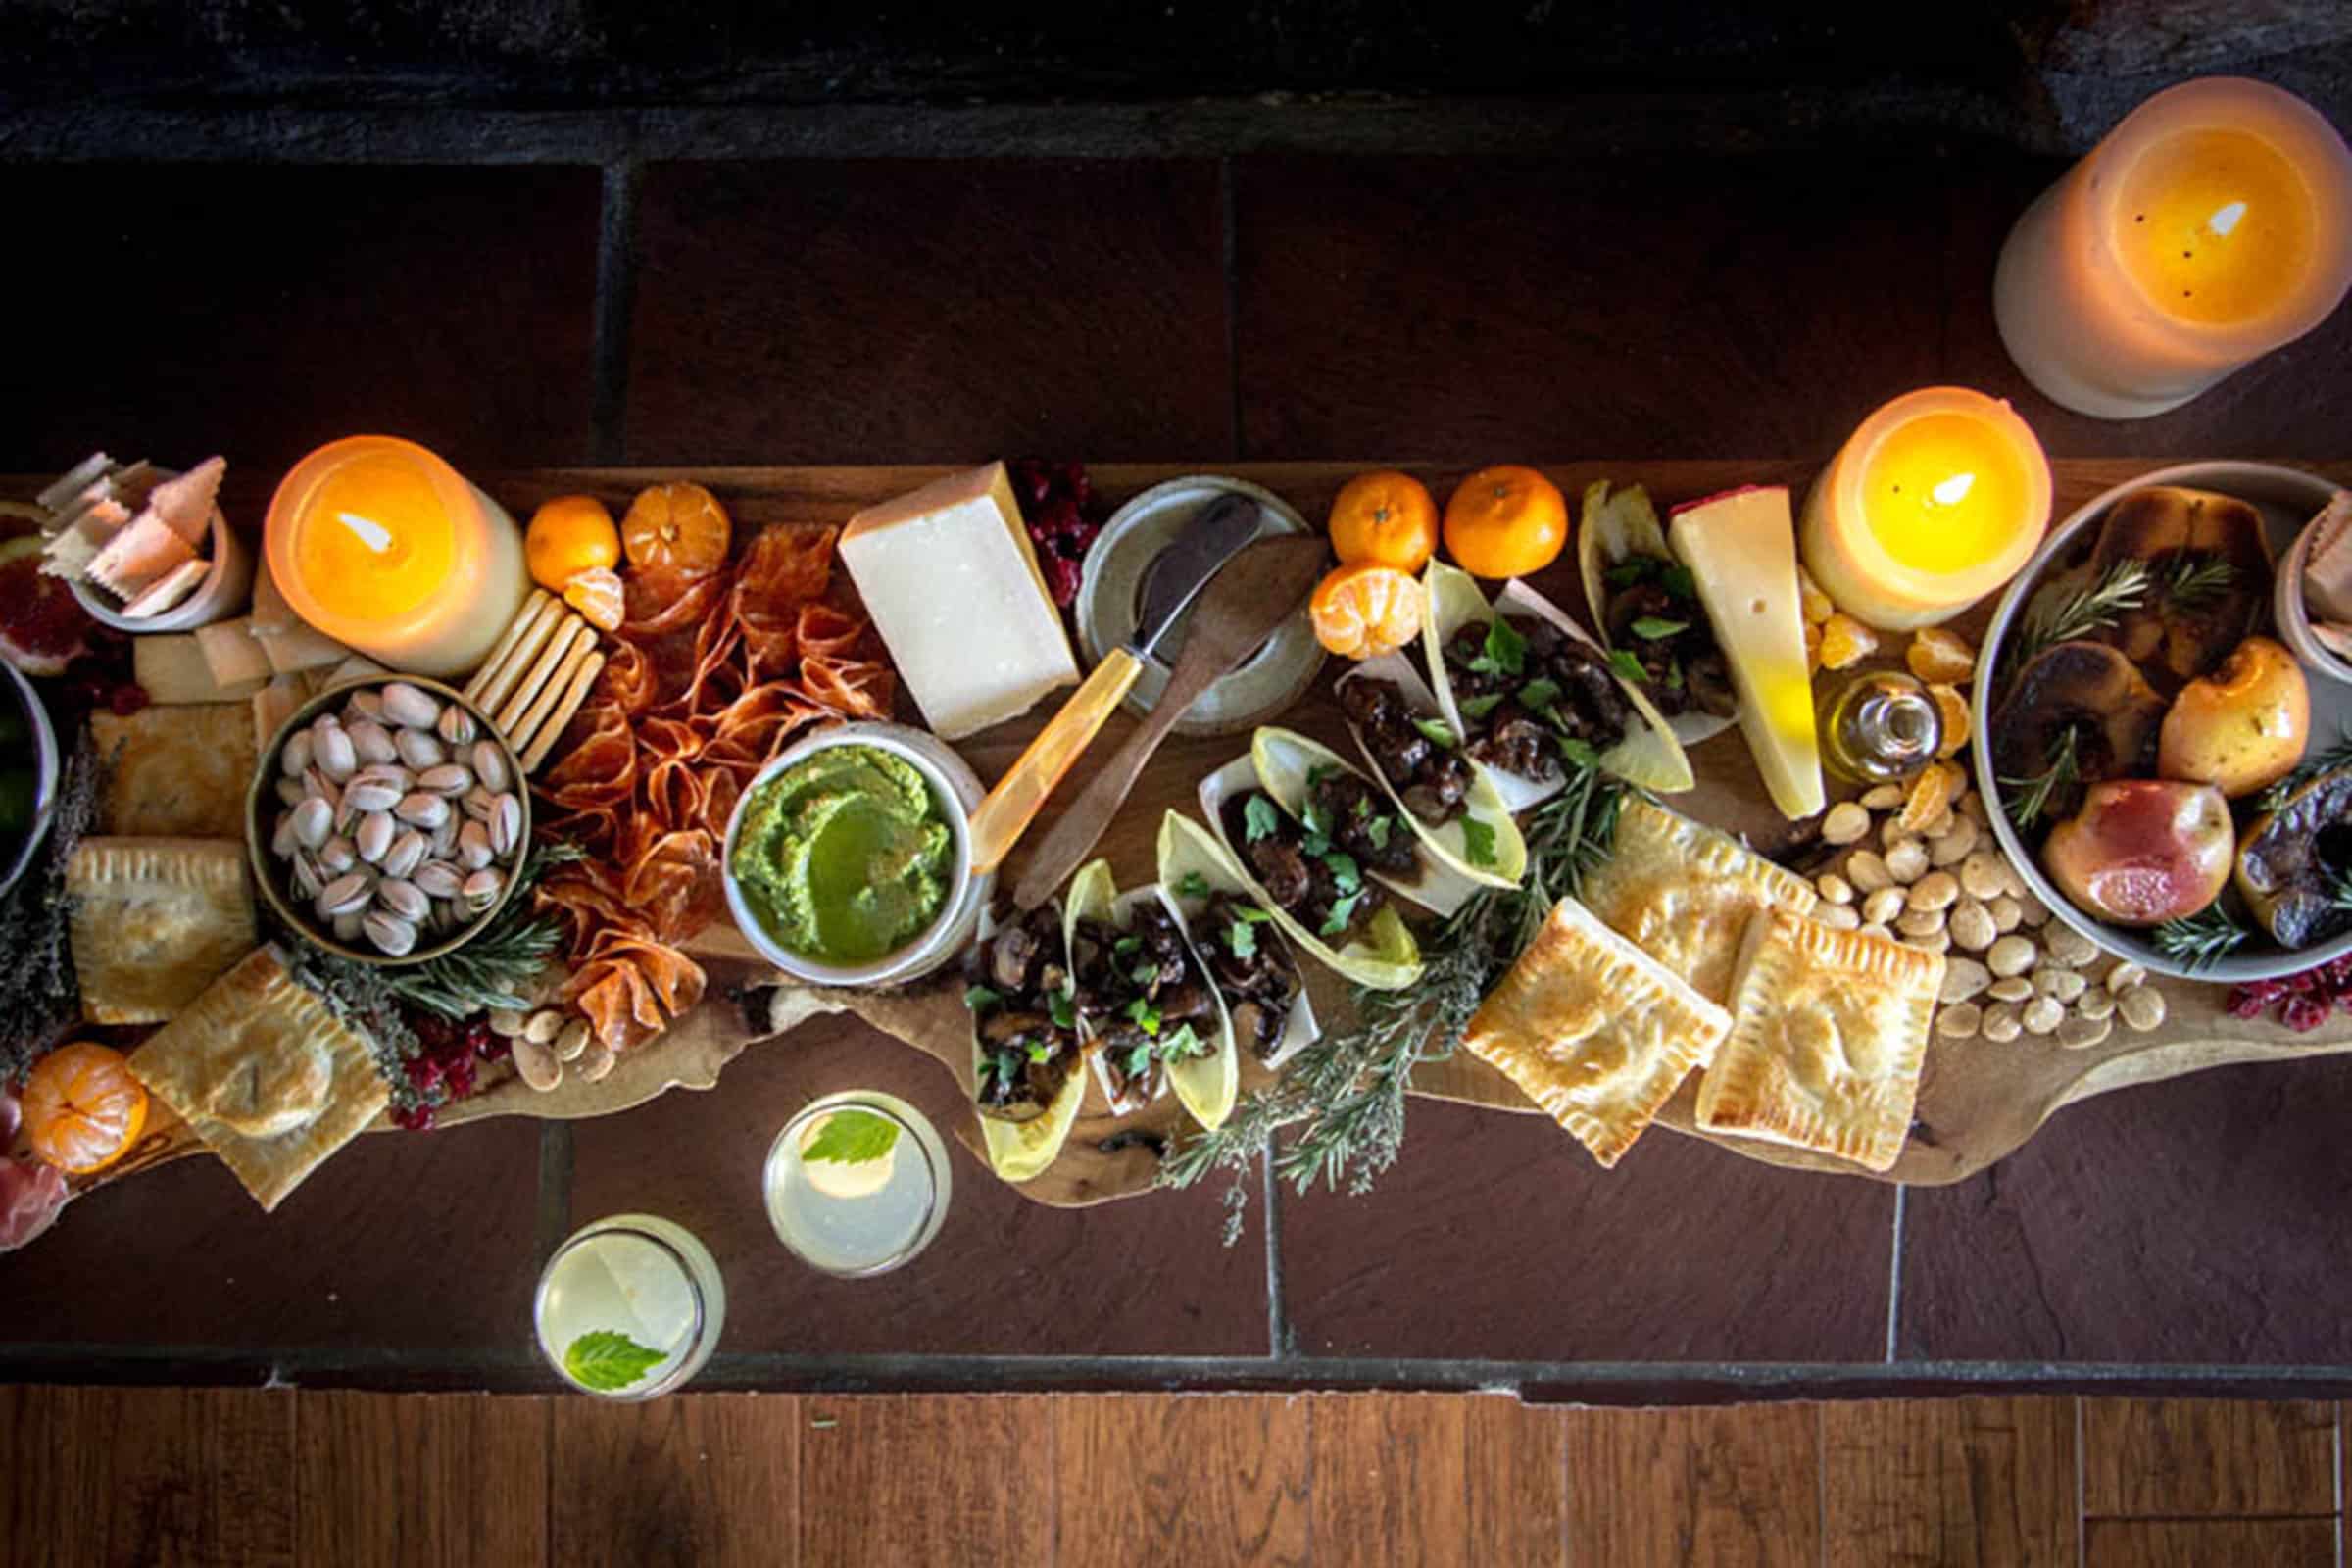 How To Throw A Polenta Party | Appetizer Spread @saltandwind